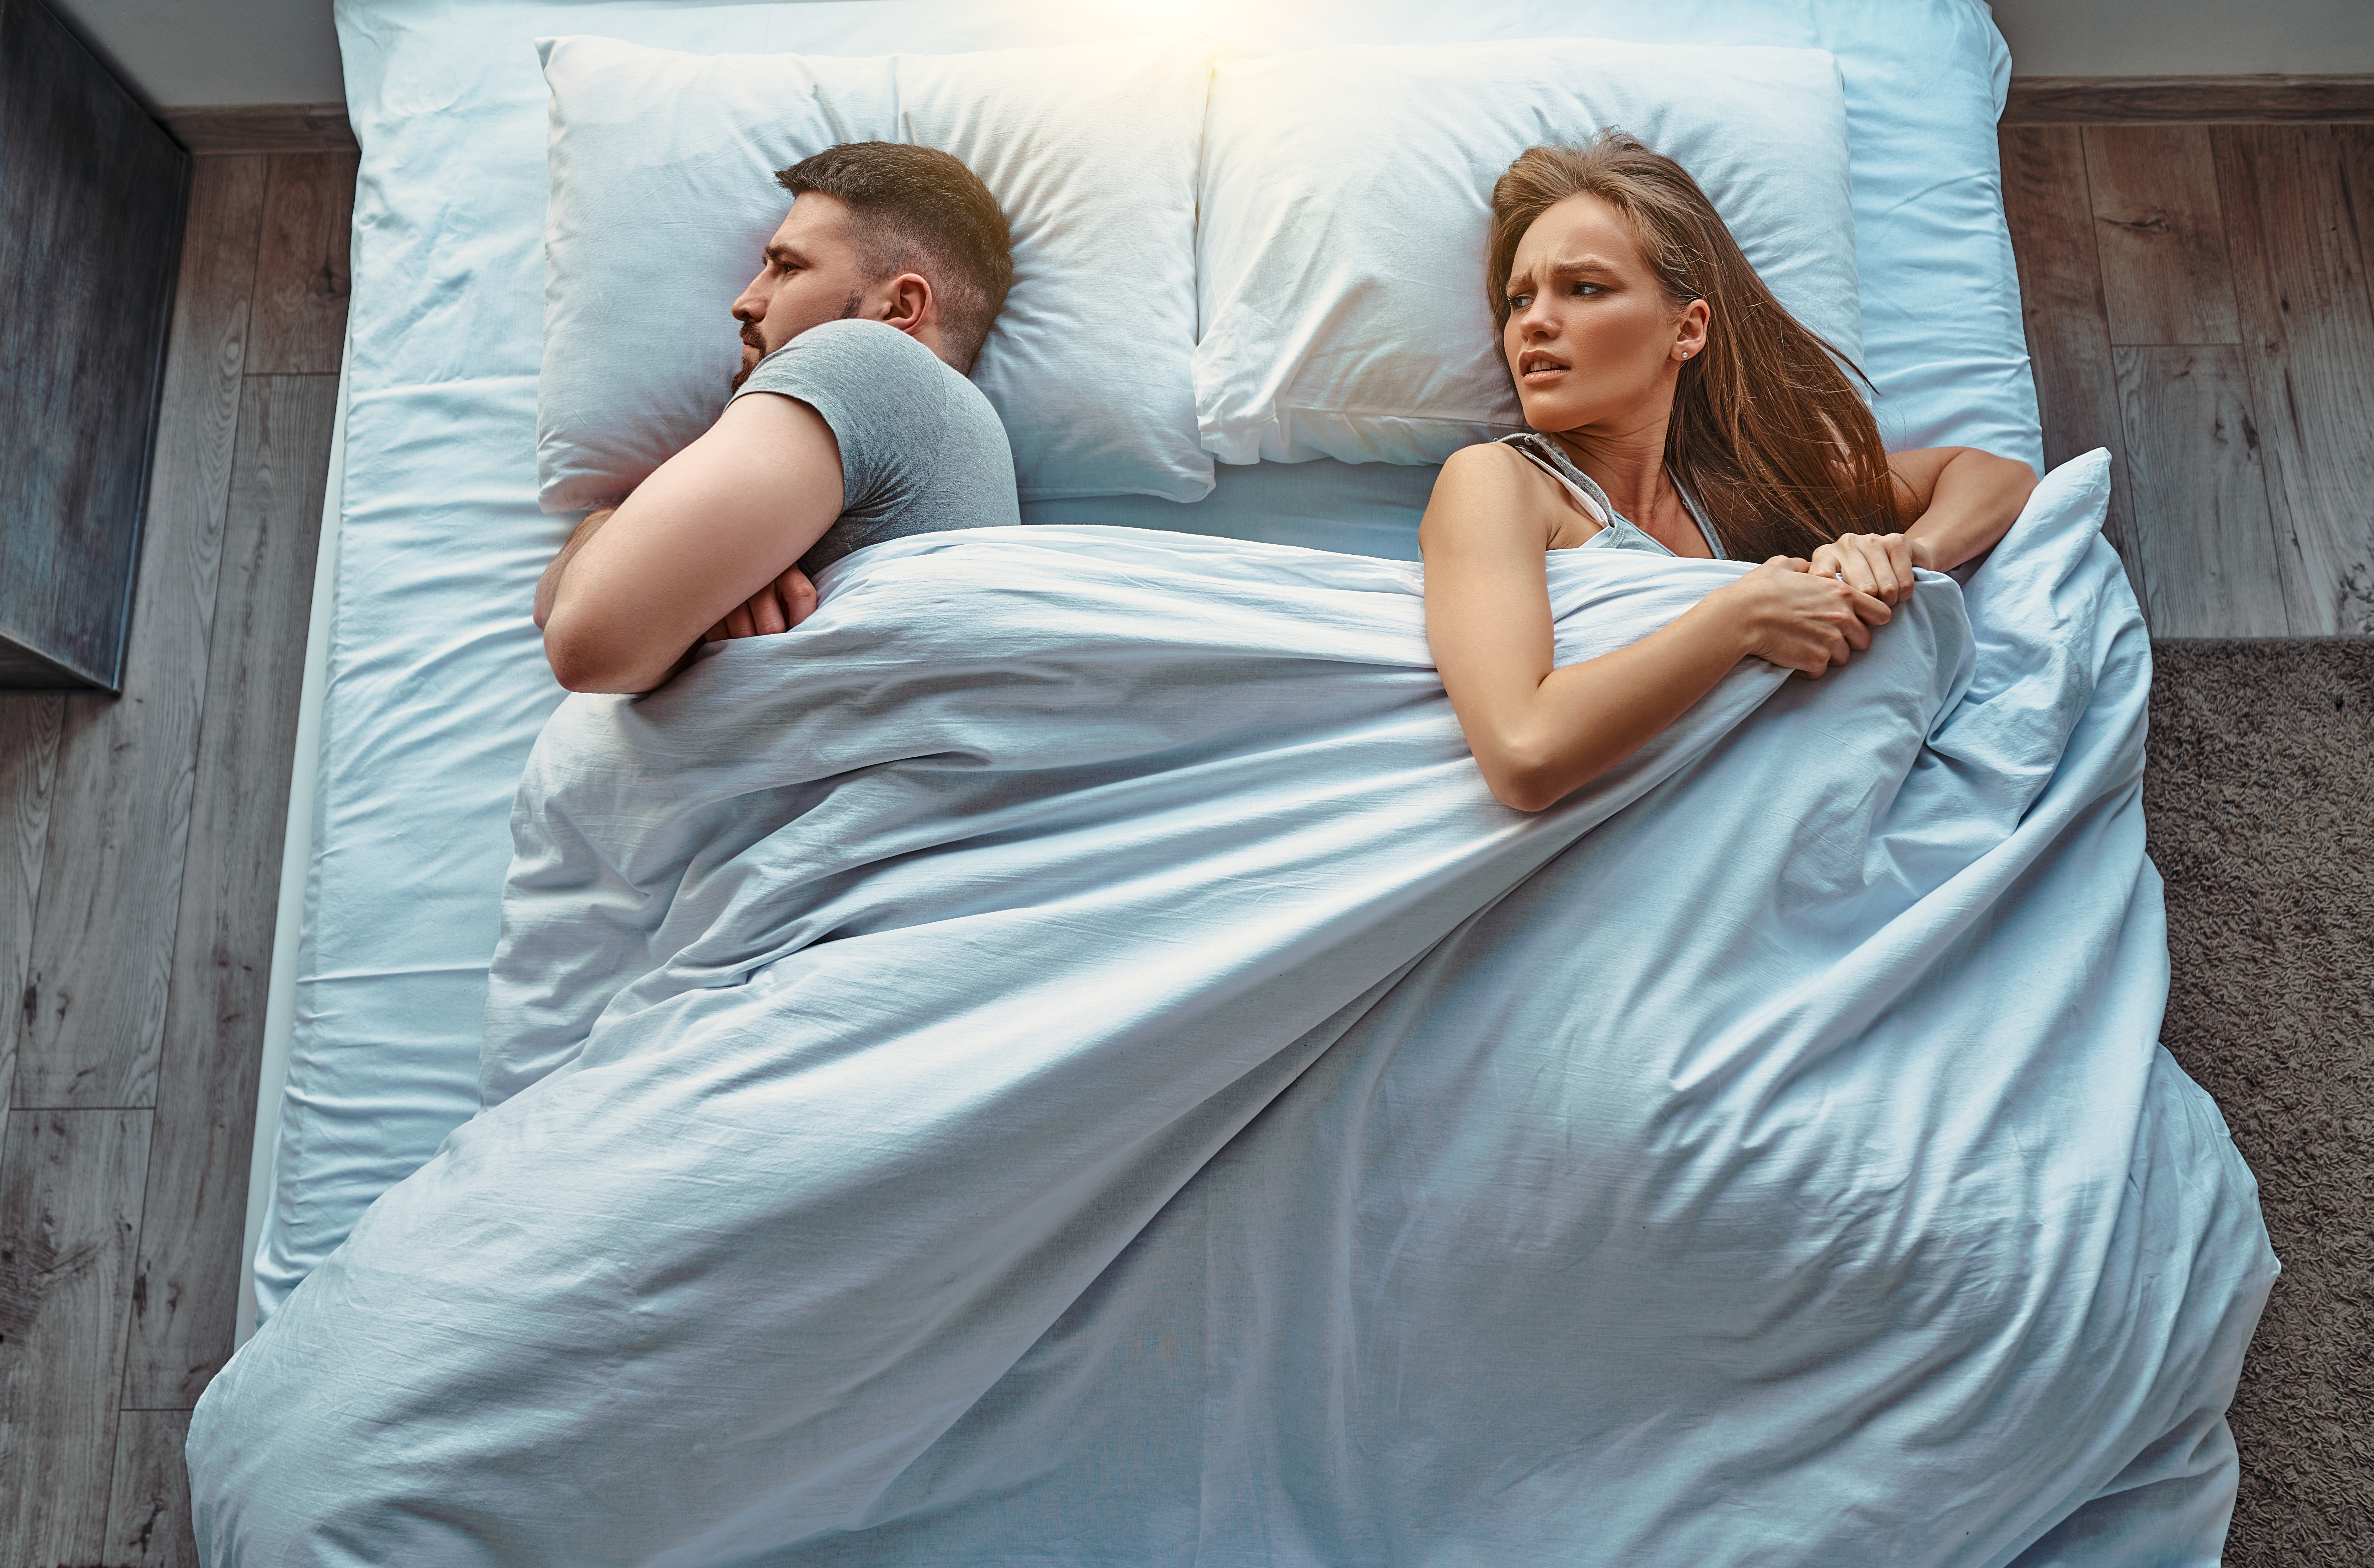 Man and woman fighting in bed | Source: Shutterstock